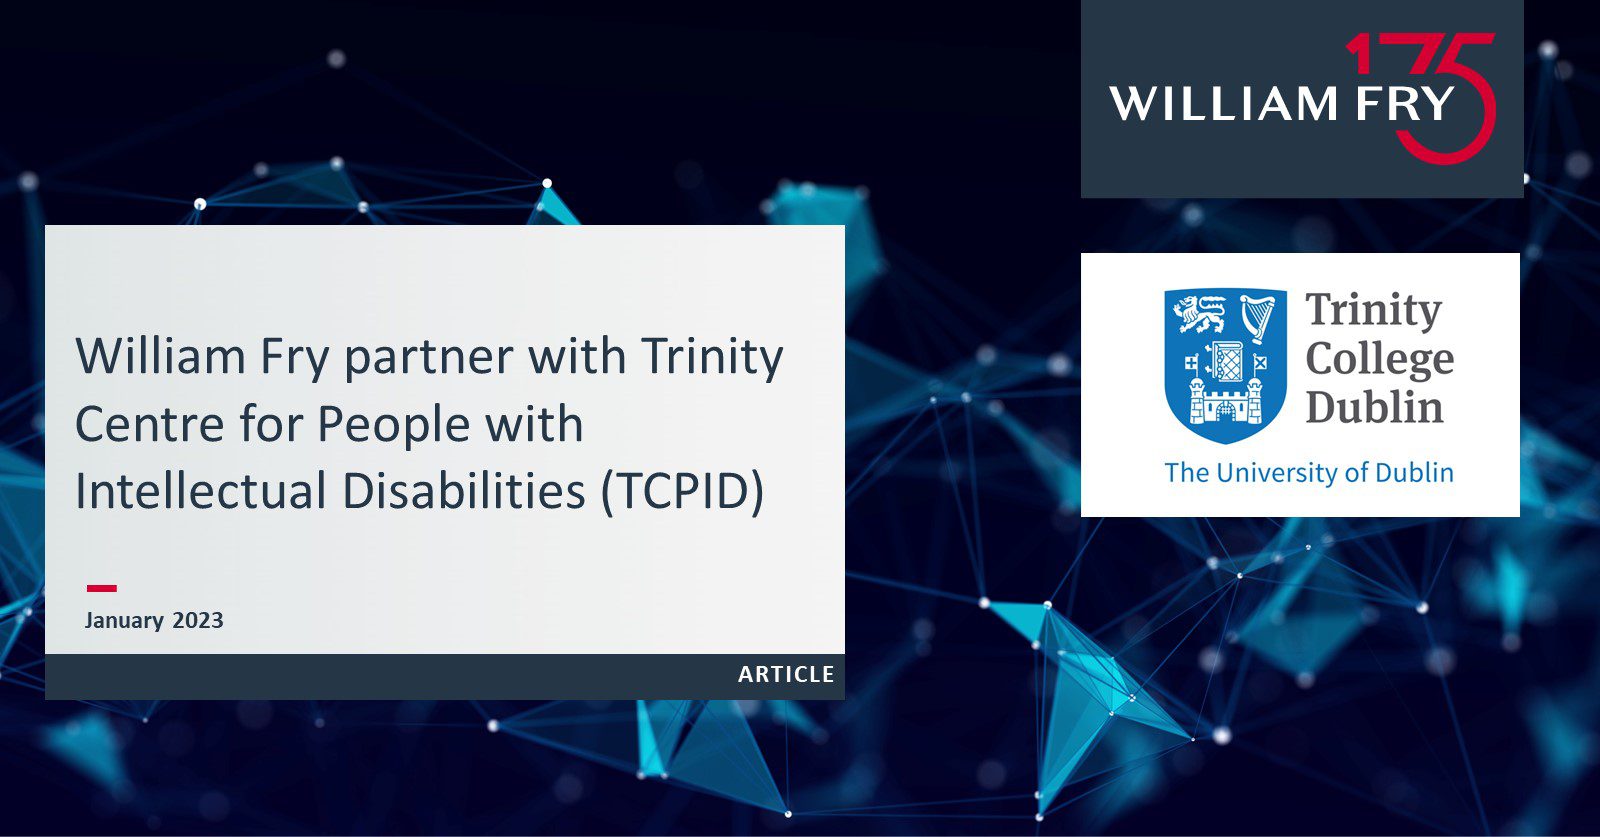 William Fry partner with Trinity Centre for People with Intellectual Disabilities (TCPID)